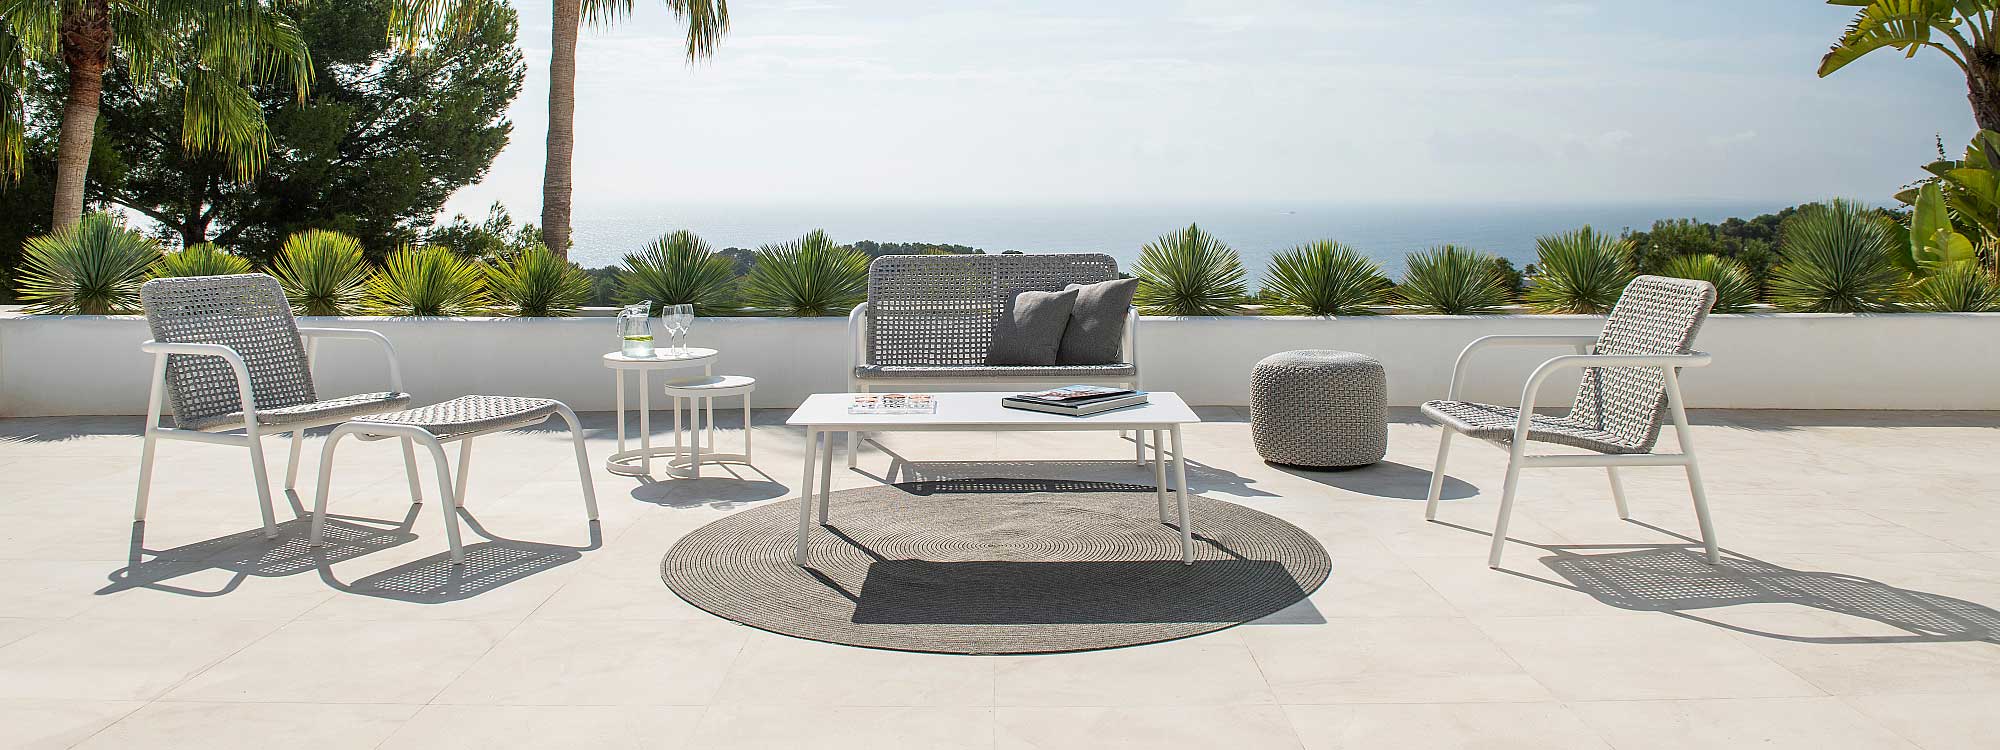 Image of Durham 2 seat garden sofa and lounge chairs with white tubular aluminium frame and white-grey Polyolefin hand-woven rope seat & back on sunny terrace